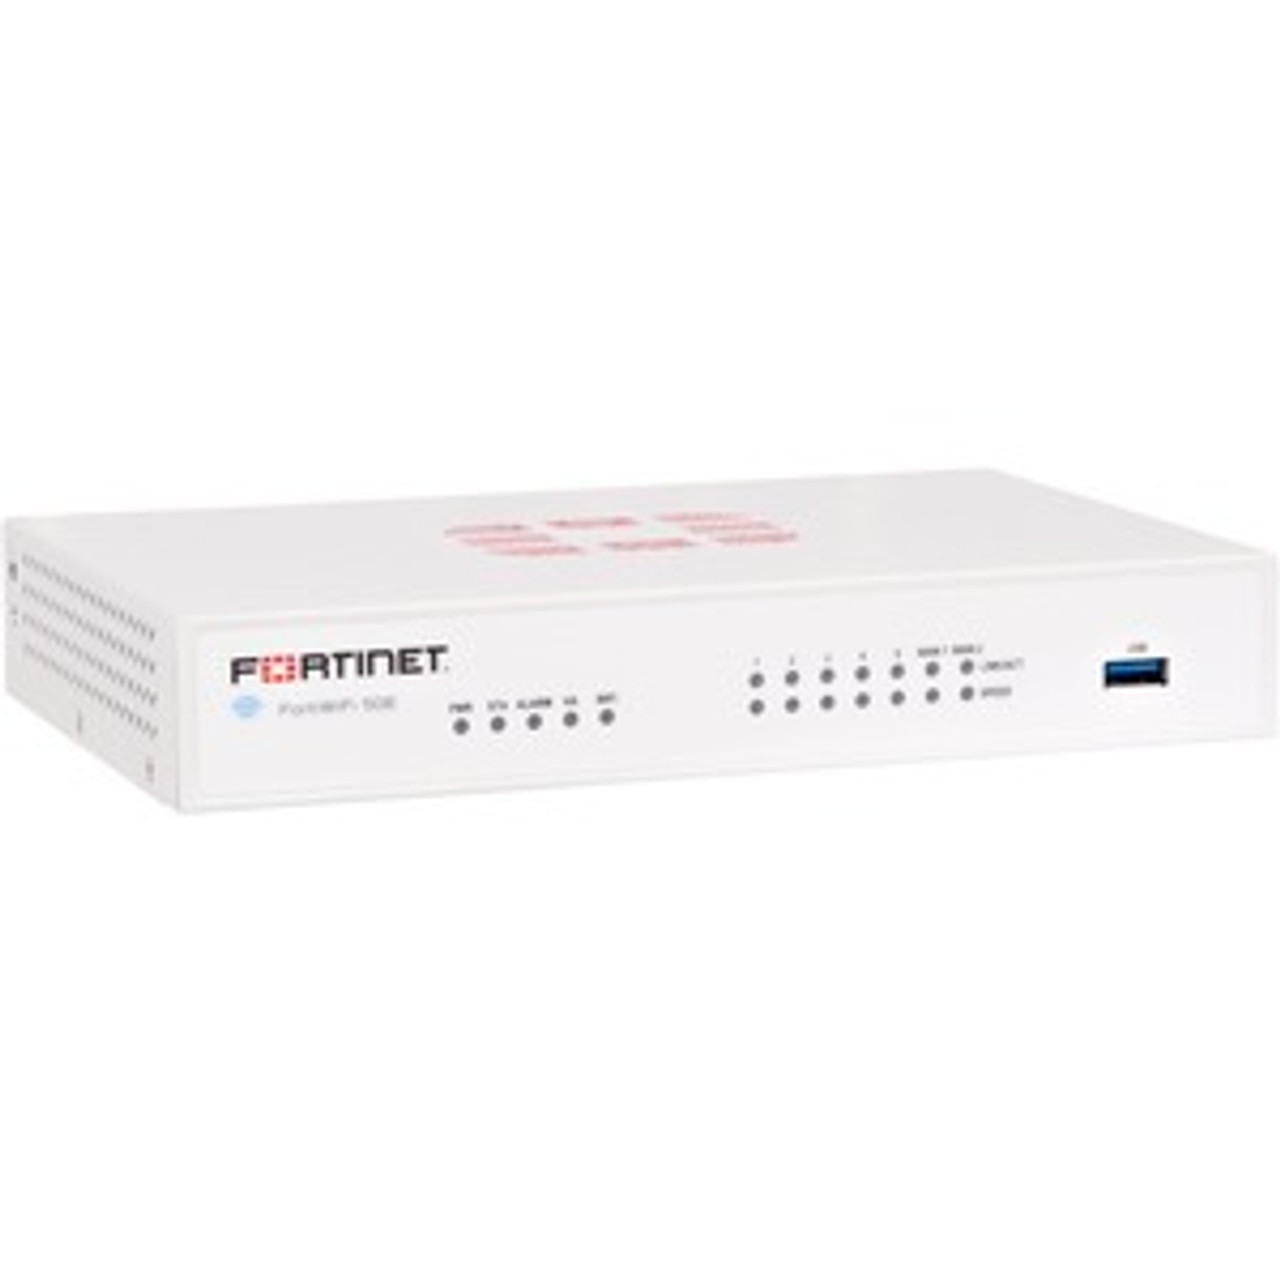 Fortinet FortiWifi FWF-50E Network Security/Firewall Appliance - 7 Port - 10/100/1000Base-T - Gigabit Ethernet - Wireless LAN IEEE 802.11a/b/g/n - AES (256-bit), SHA-256 - 200 VPN - 5 x RJ-45 - 1 Year 24X7 Forticare and Fortiguard ENT Protect -..